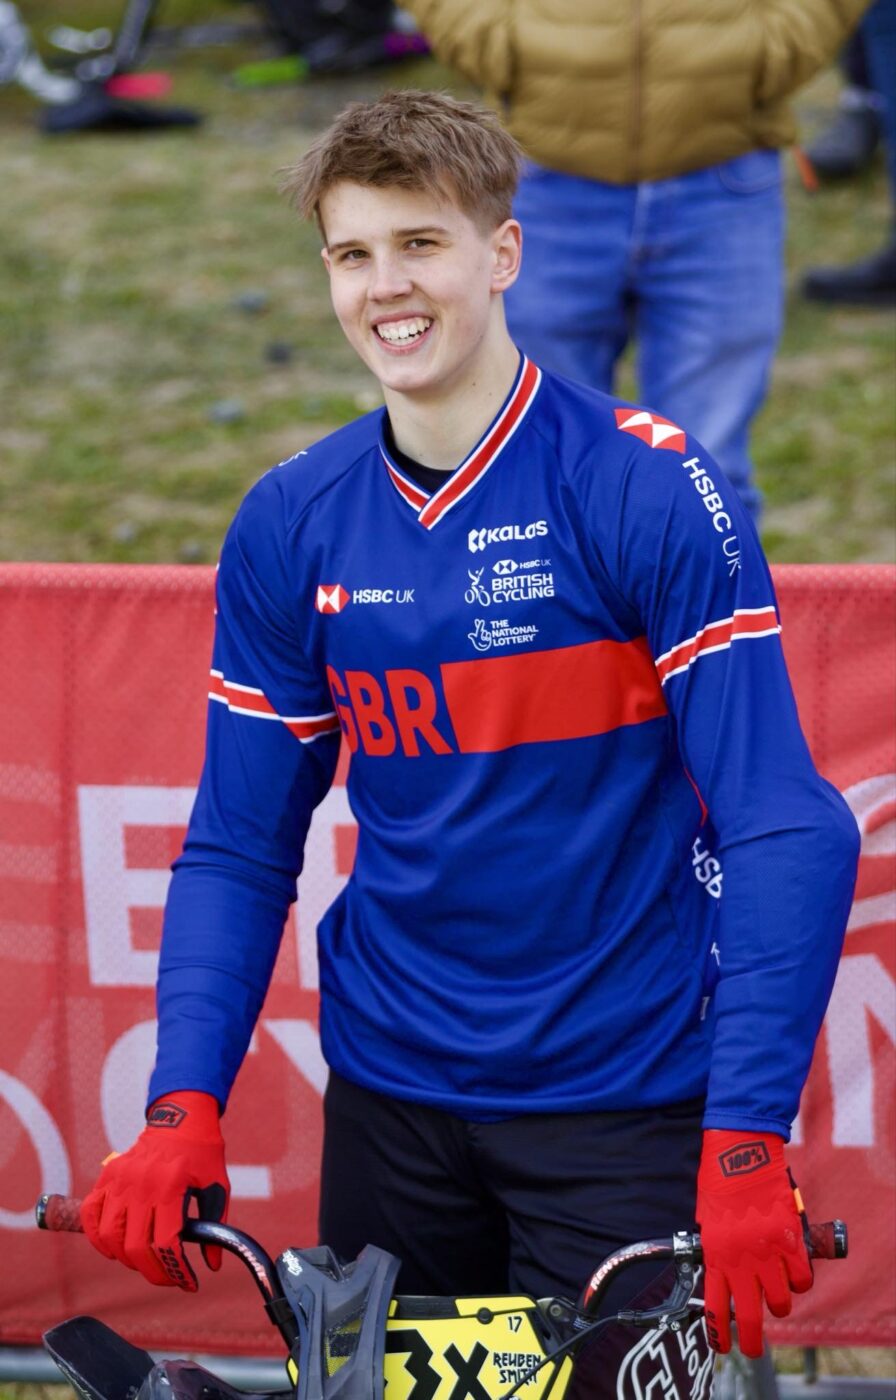 A young man named Reuben is pictured smiling, whilst dressed in his cycling gear, after having just finished a race.